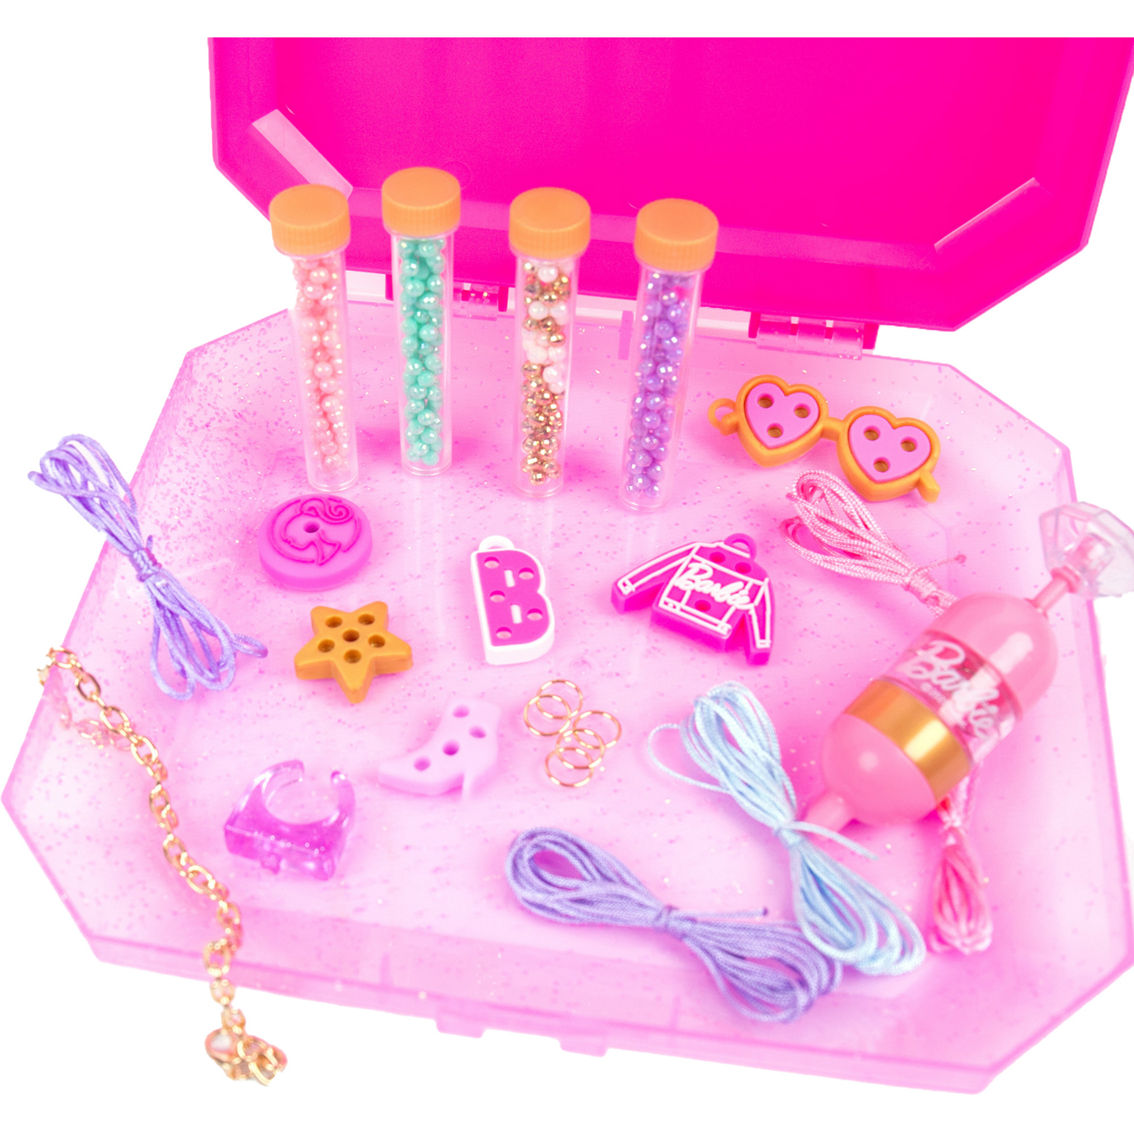 Barbie Sparkling Bling Jewelry - Image 3 of 4